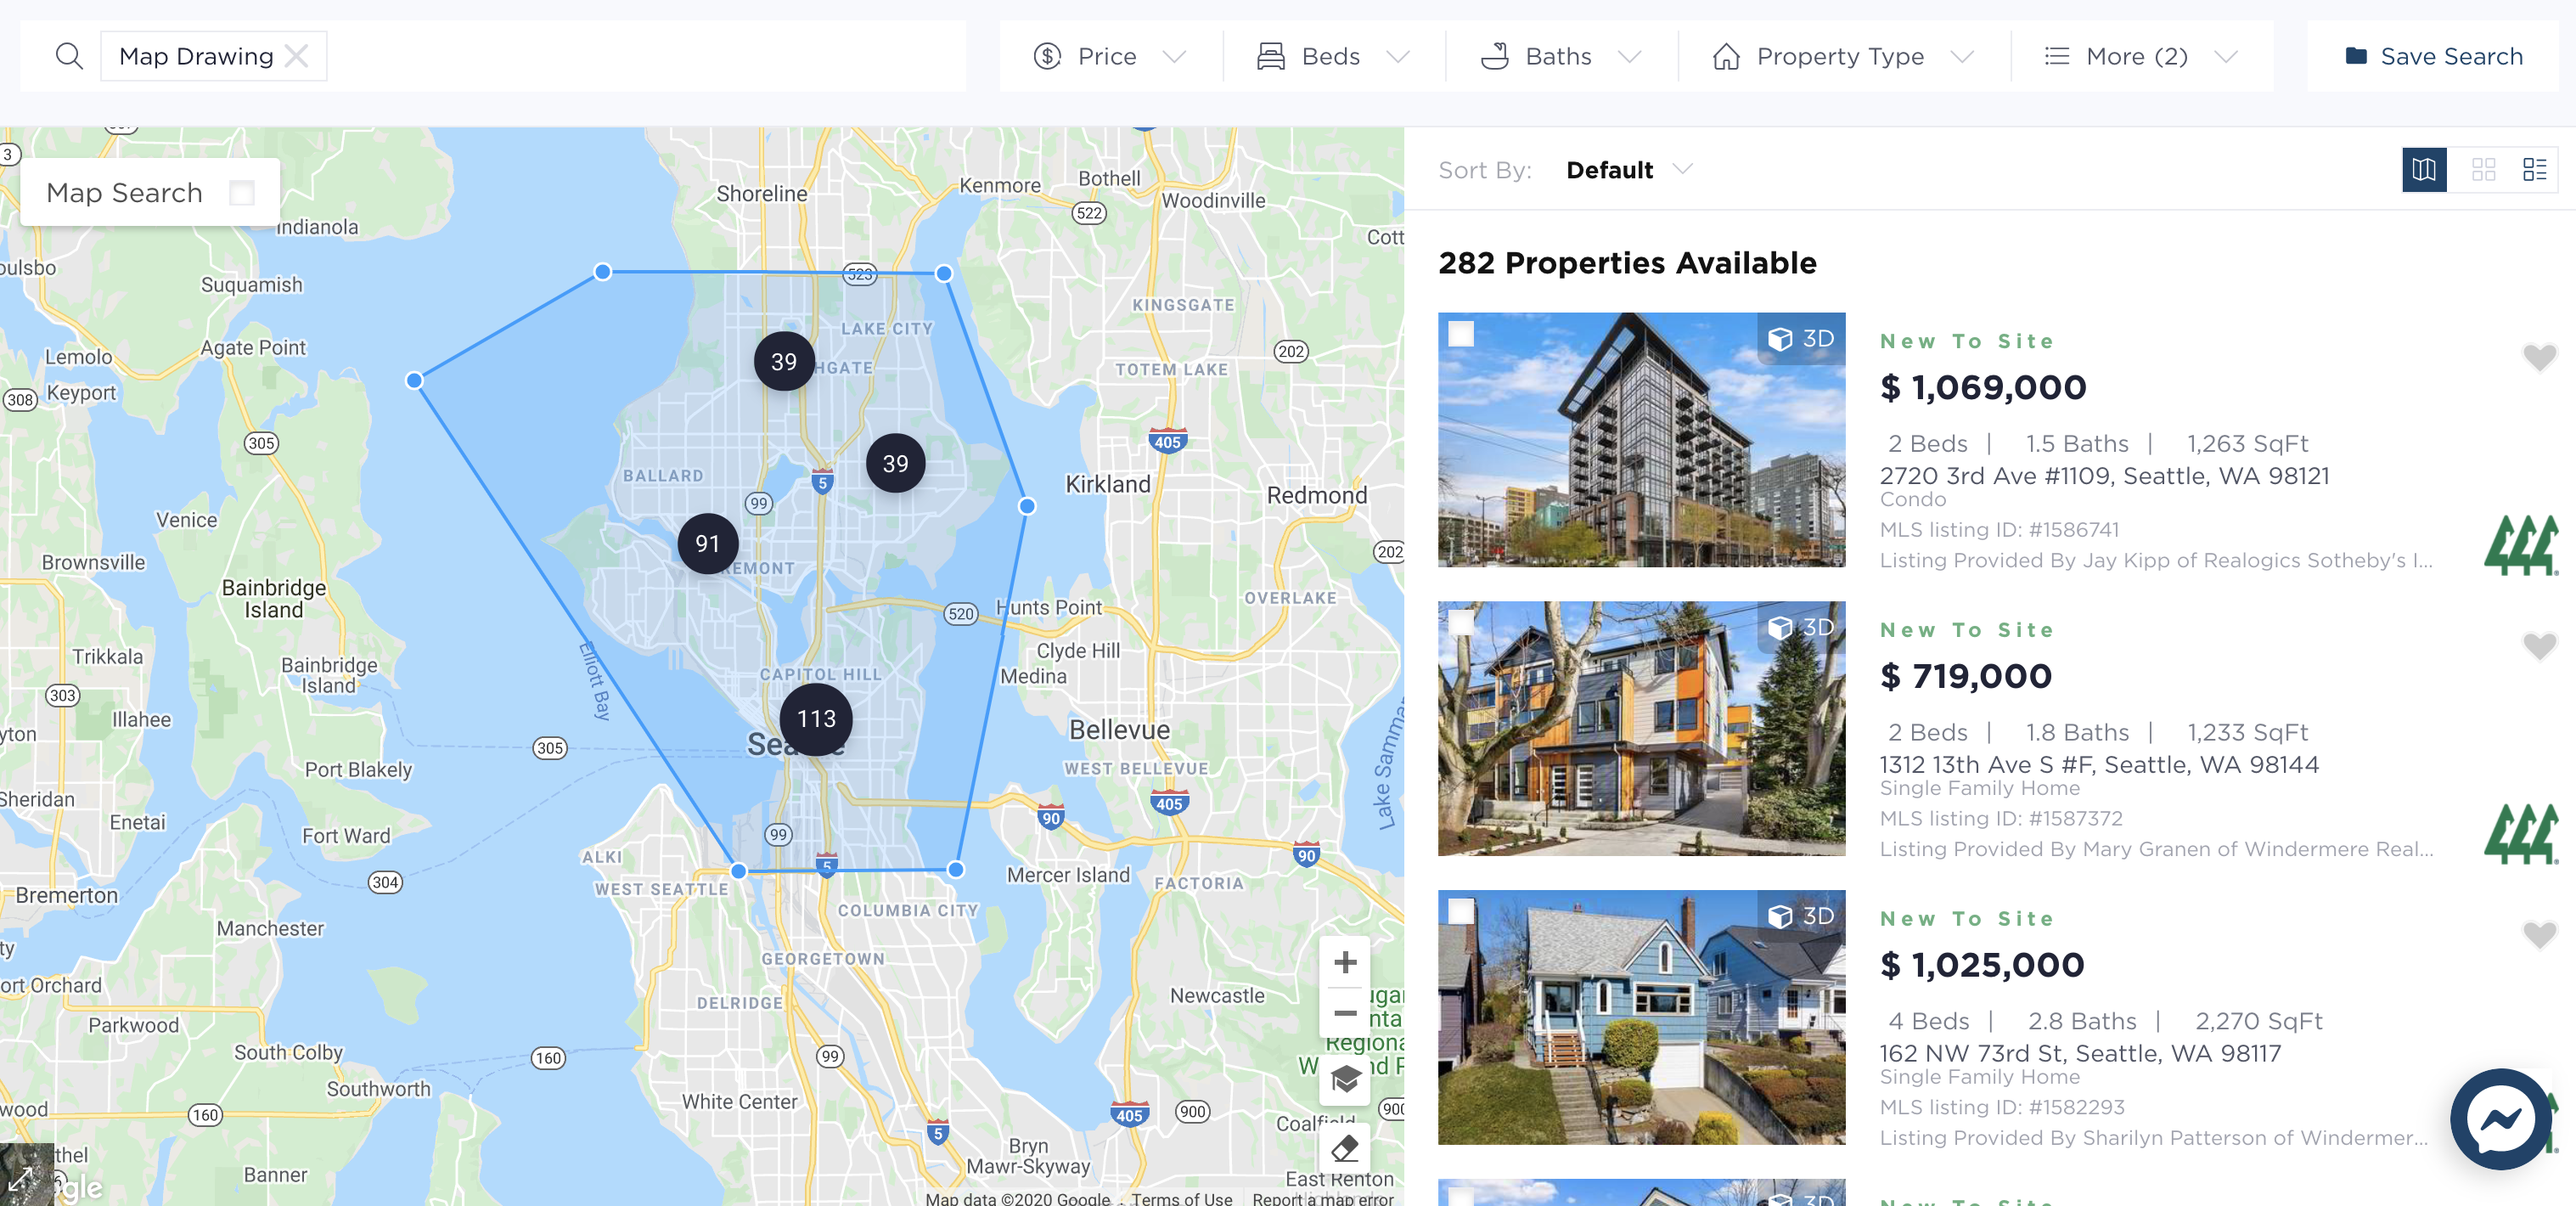 282 Homes On The Market With Virtual & 3D Tours!